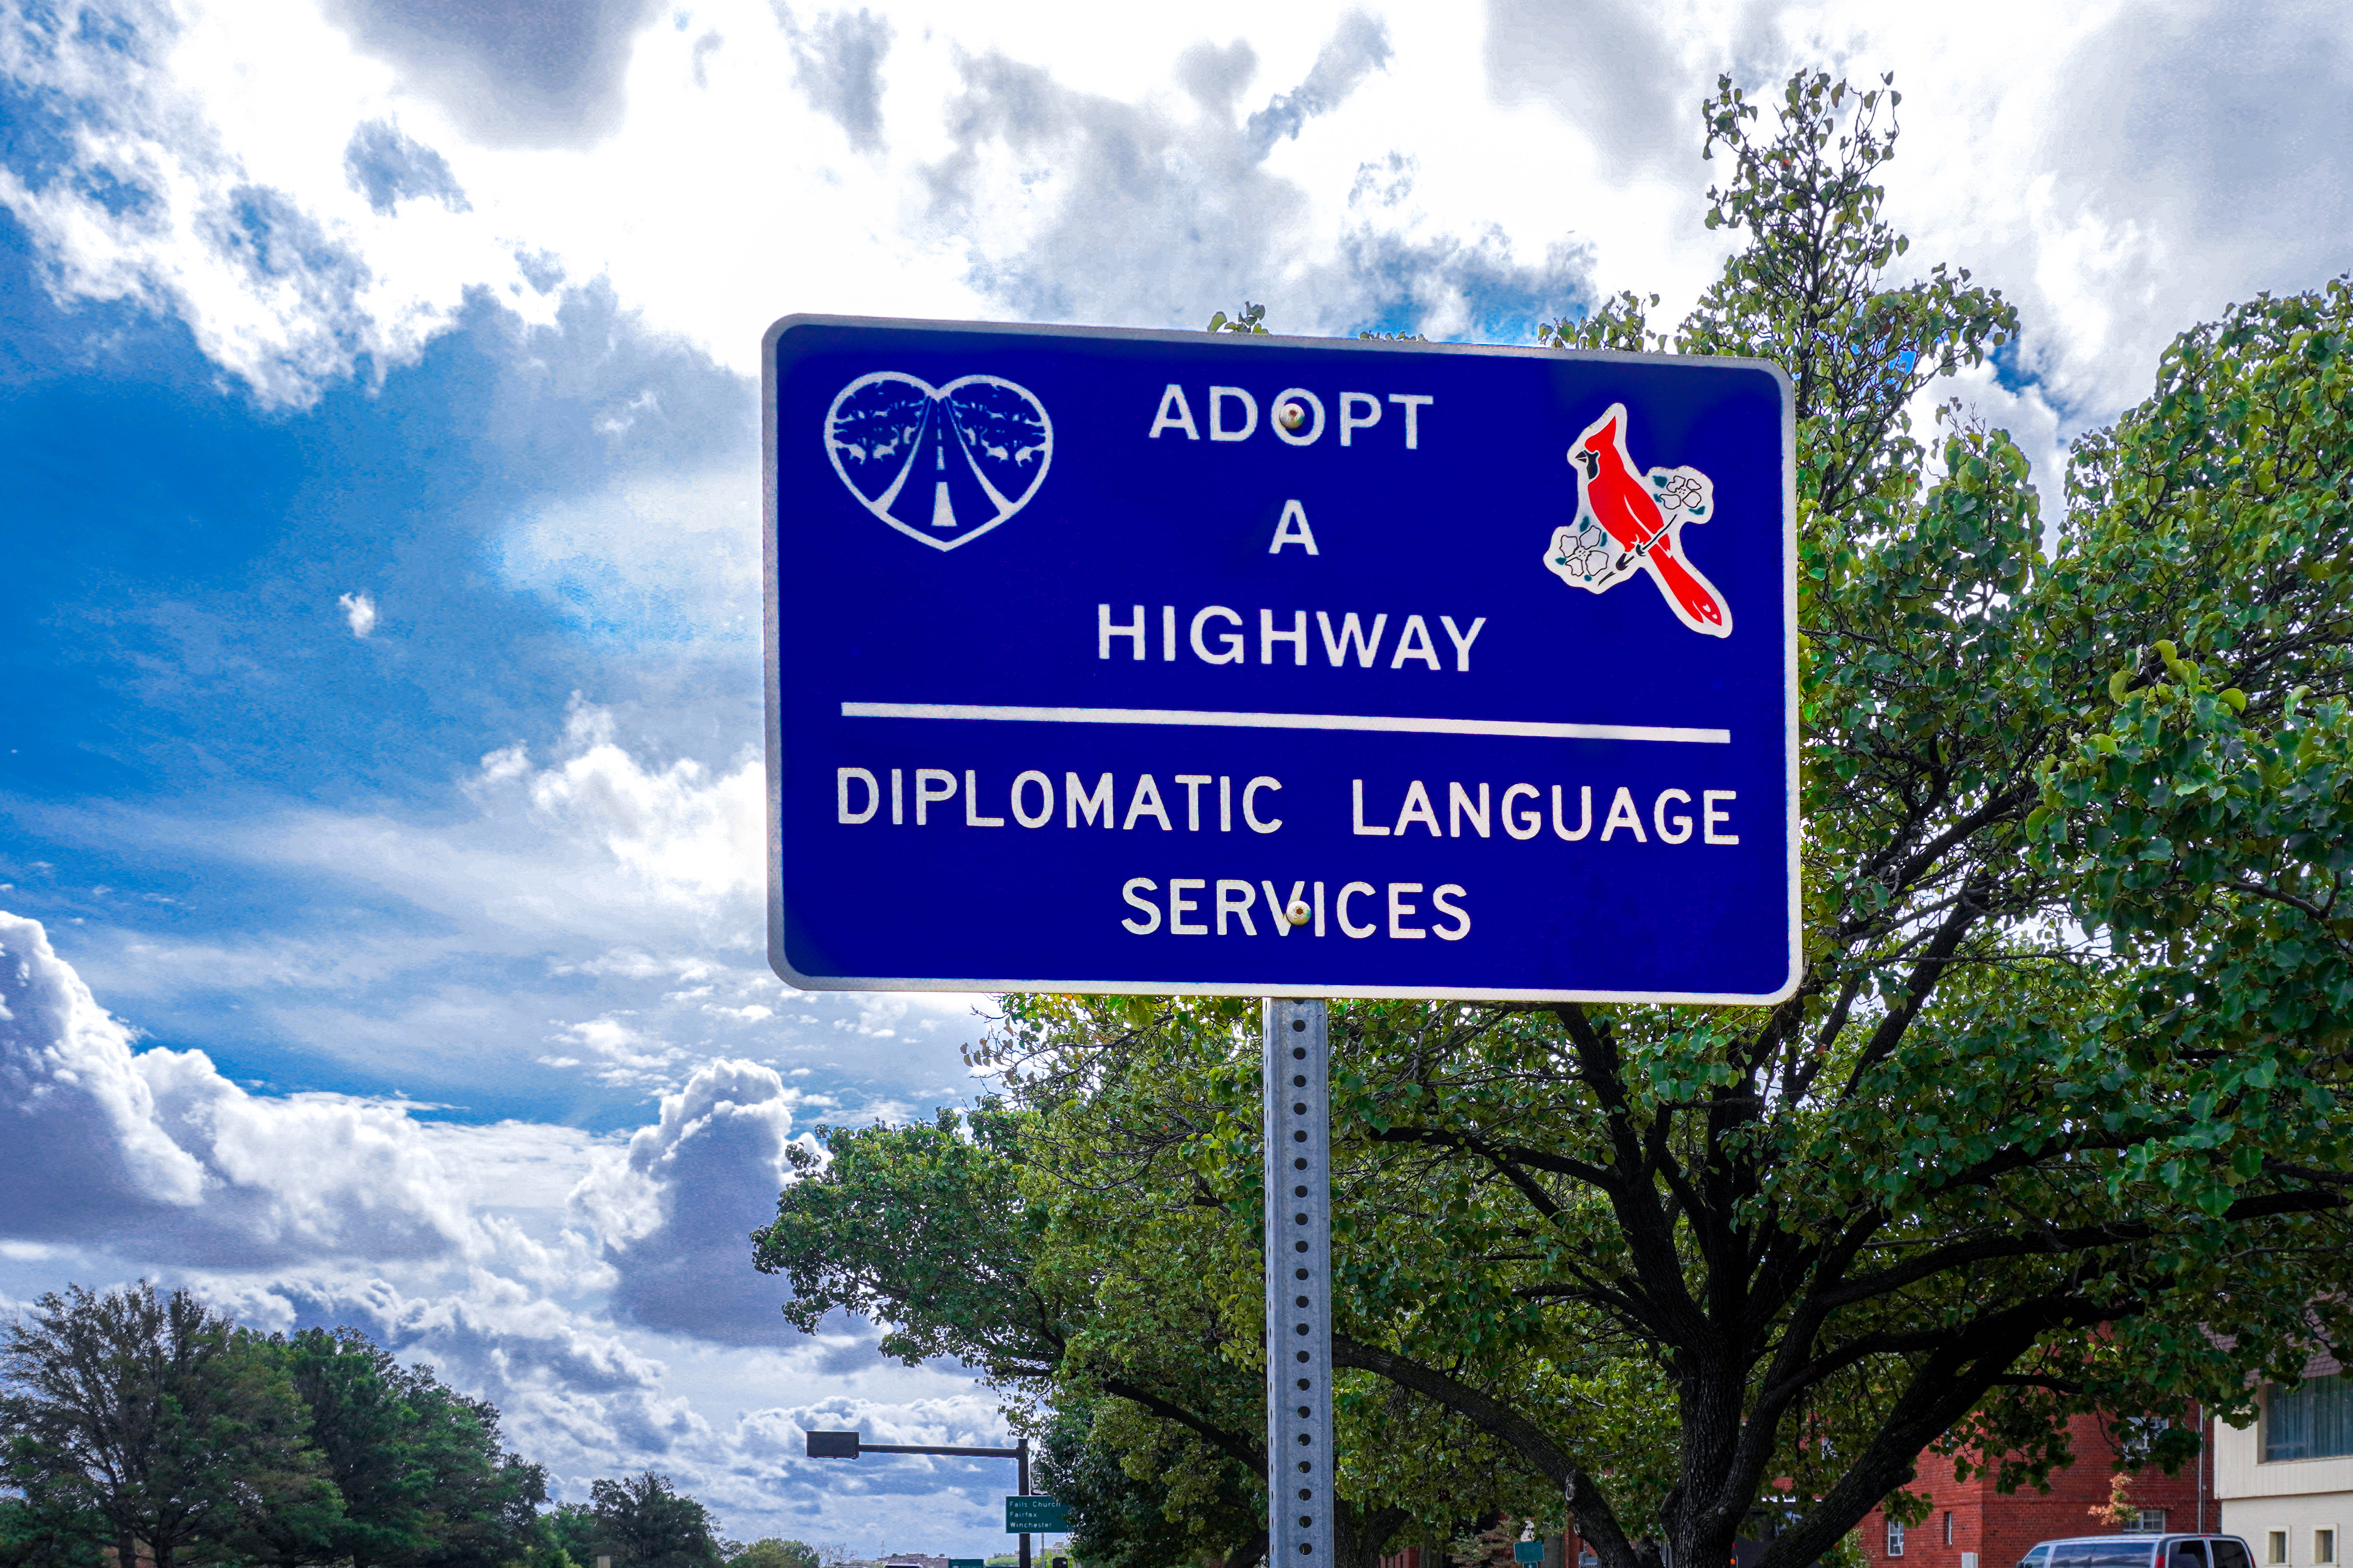 Diplomatic Language Services adopt-a-highway sign